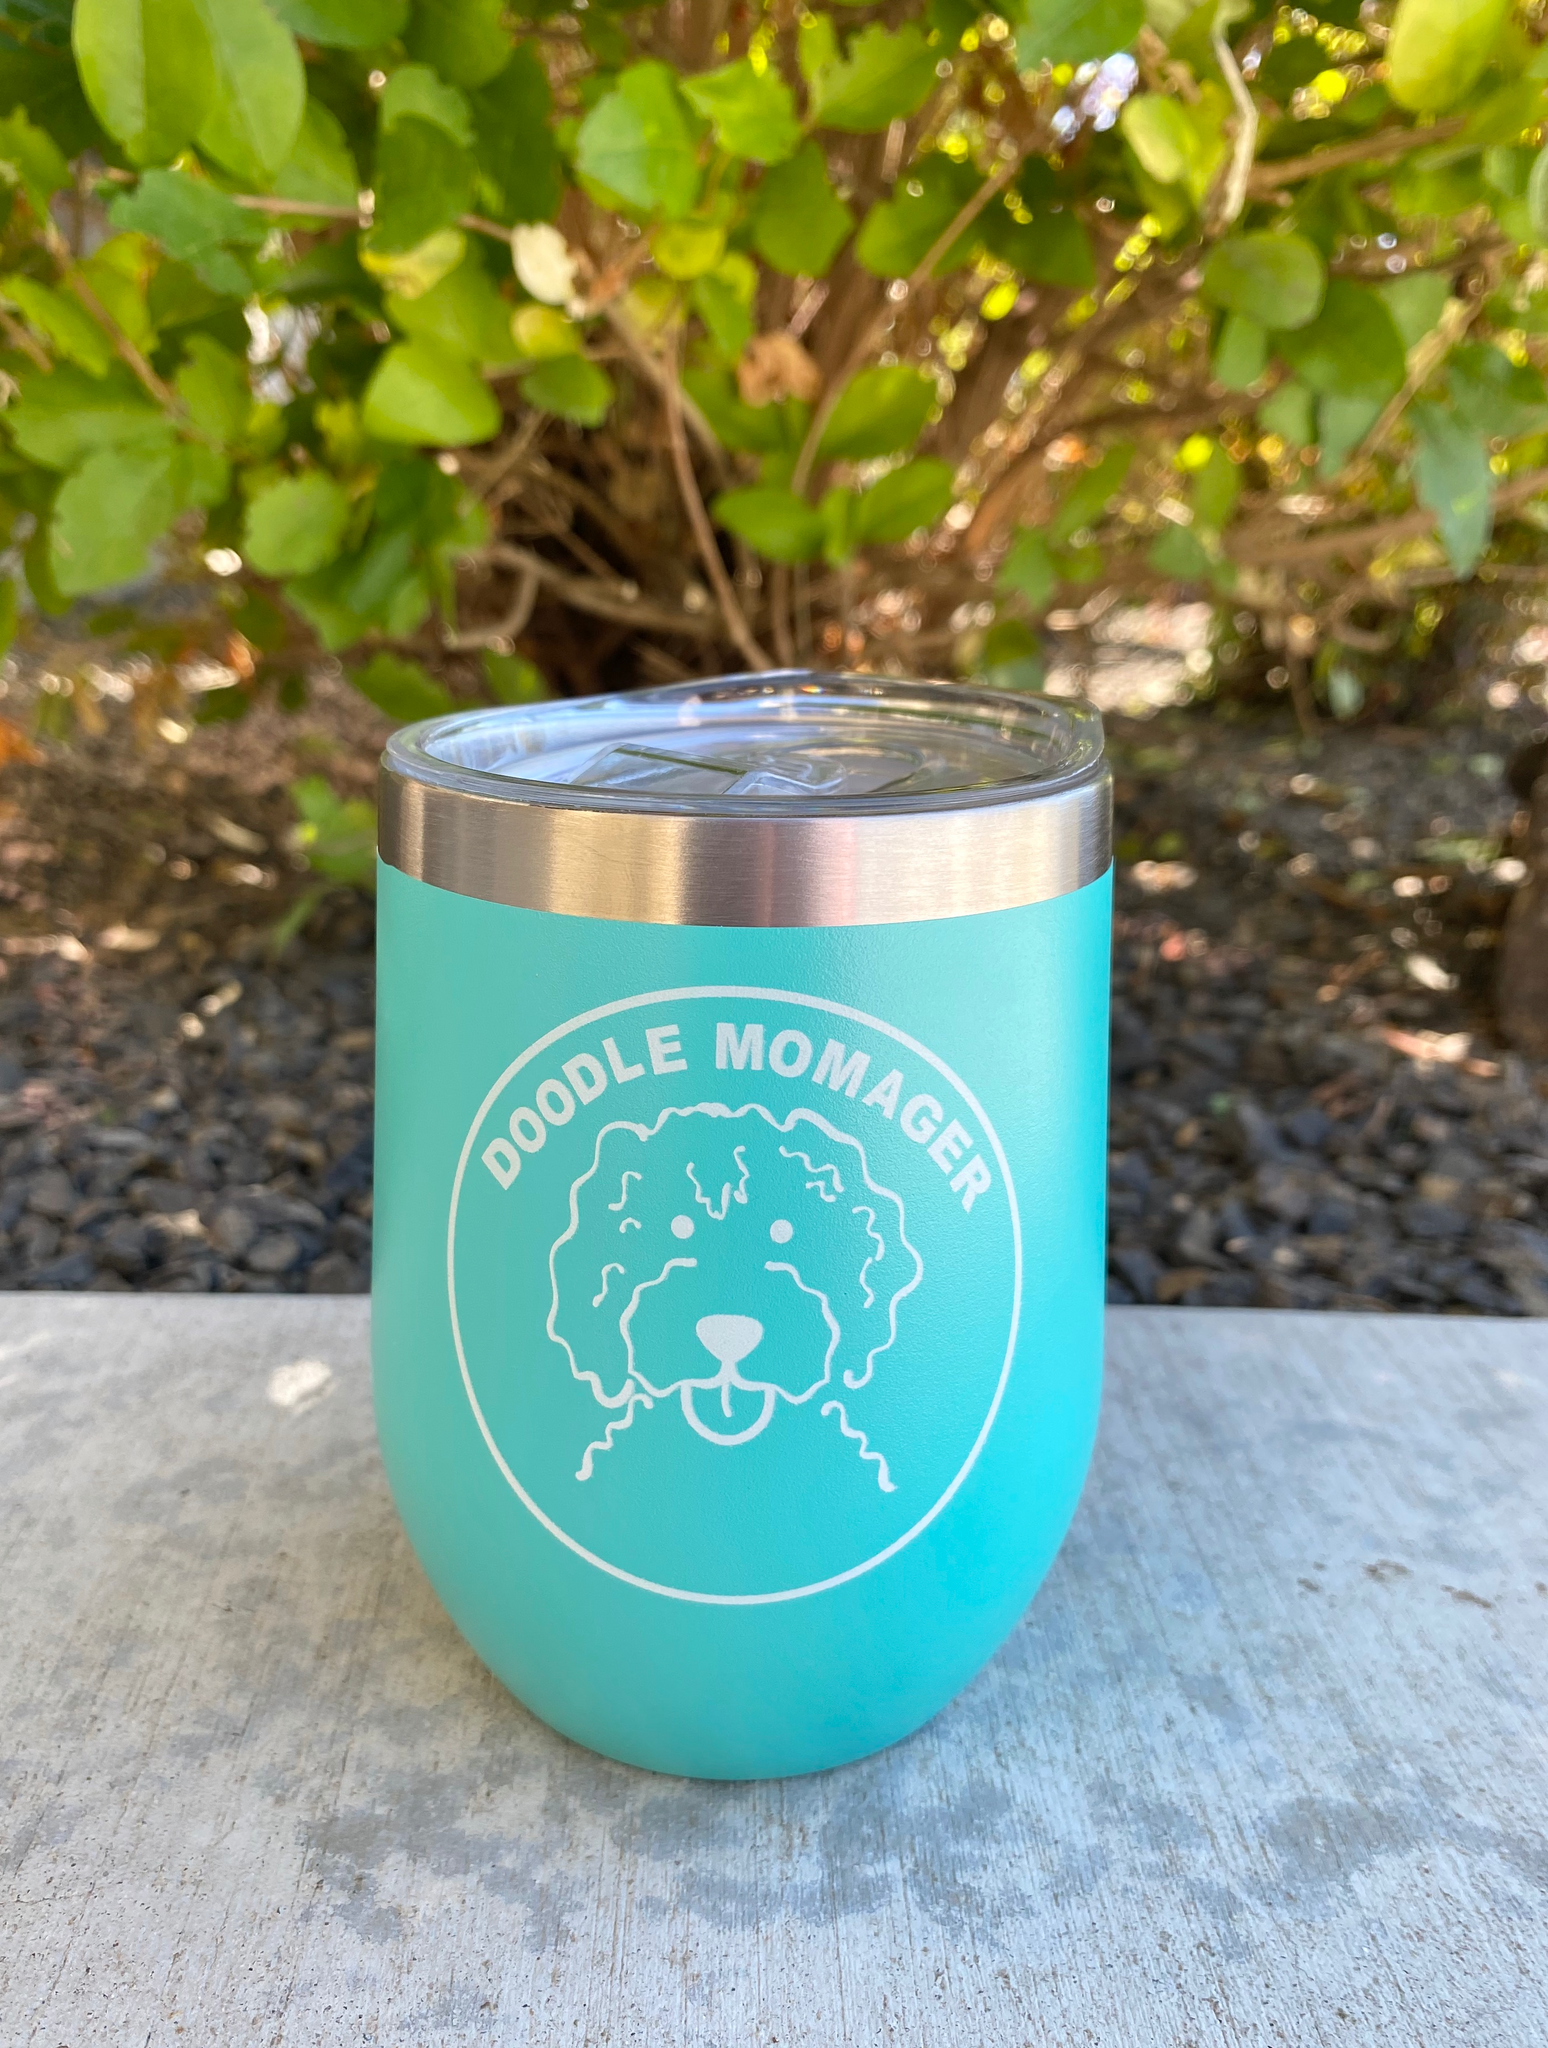 "DOODLE MOMAGER" STAINLESS STEEL MUG